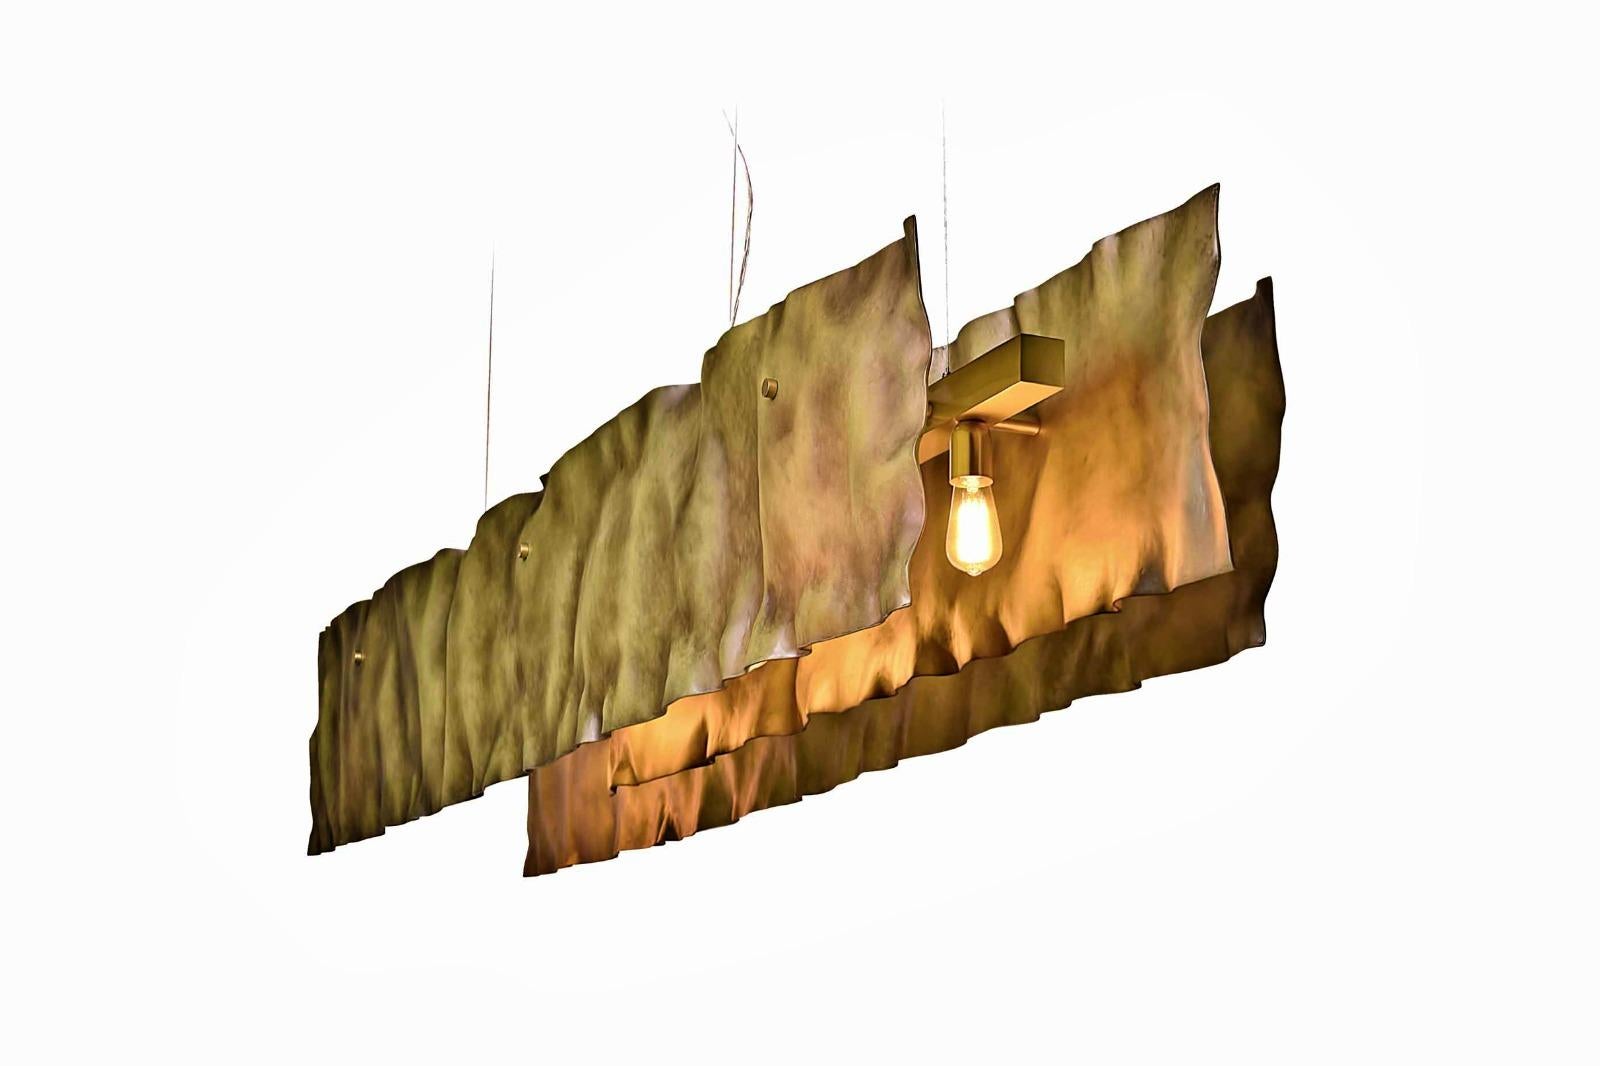 Suspension lamp

General information
Dimensions (cm): 242 x 42 x 42
Dimensions (in): 95.3 x 16.5 x 16.5
Weight (kg): 28
Weight (lbs): 61.7
Reference: KC 040
Materials and Colors
Structure: Resin reinforced with fiberglass finished in aged